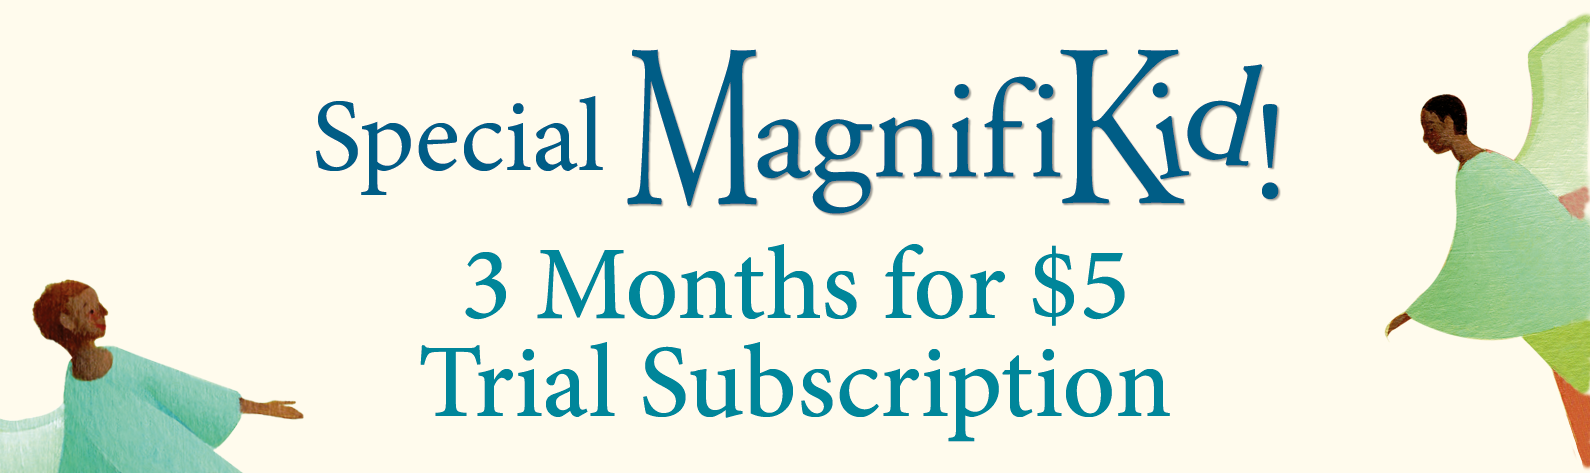 Special MagnifiKid Trial Subscription